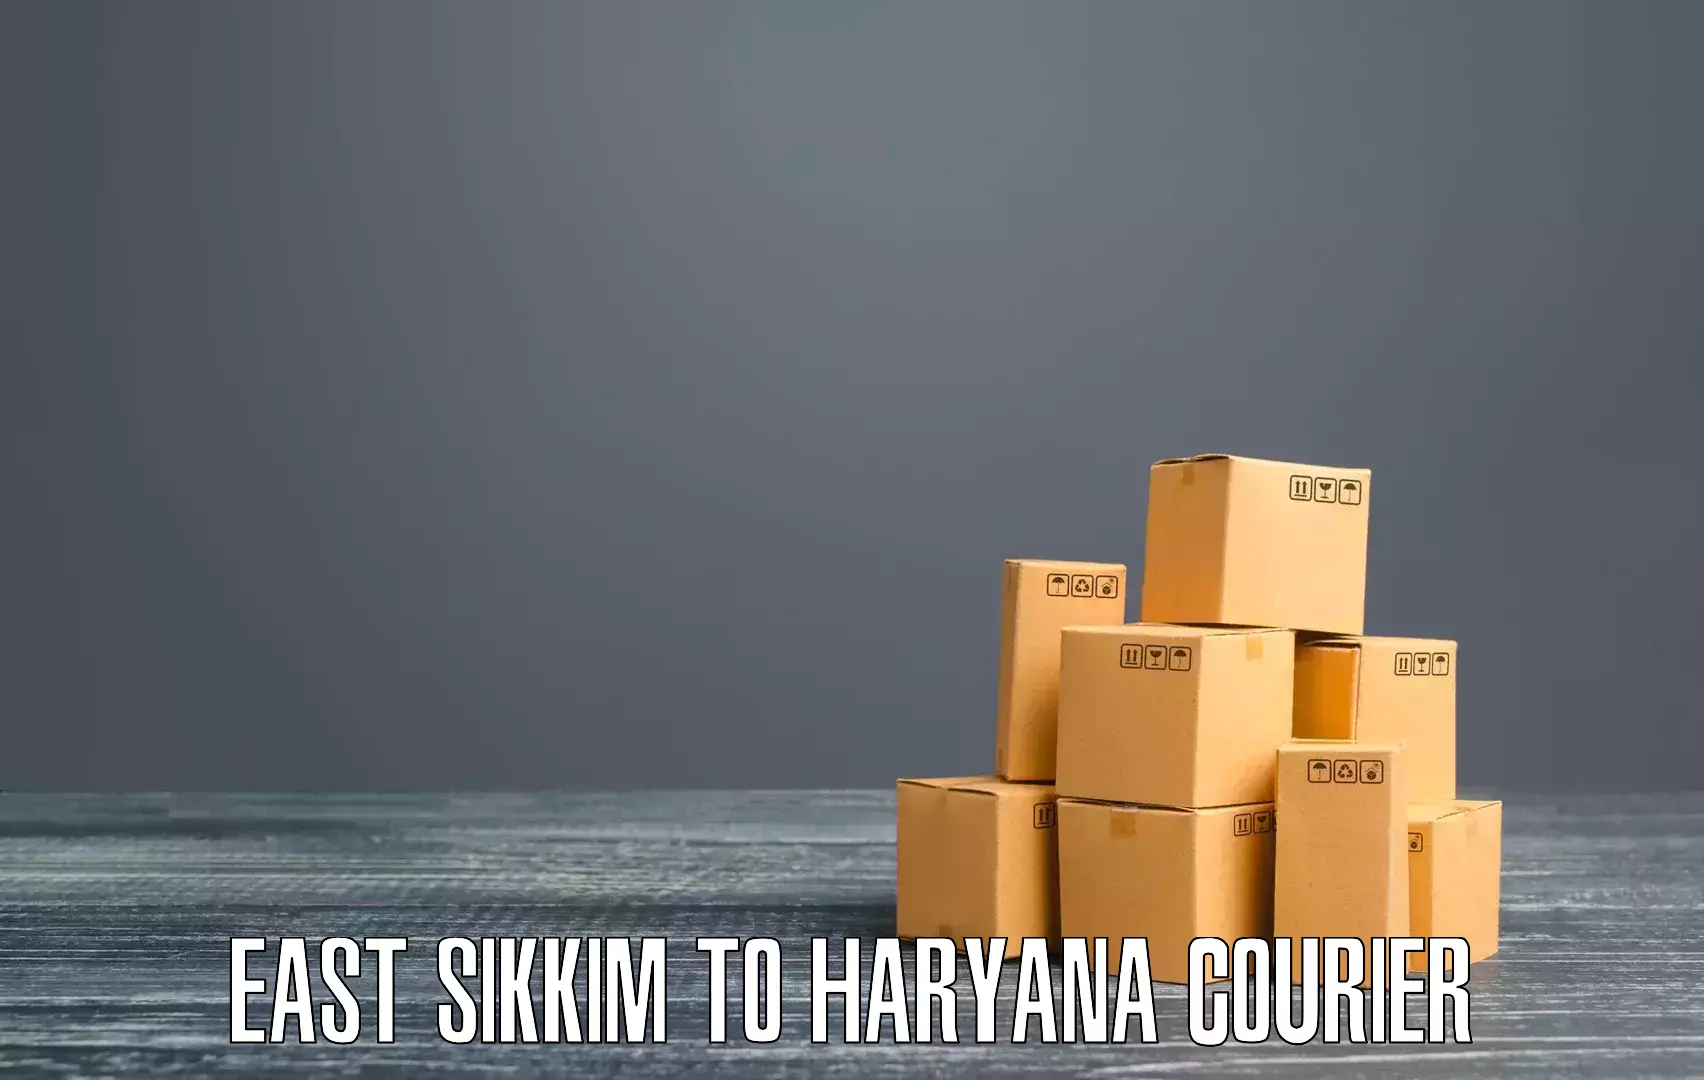 Courier service efficiency in East Sikkim to Gurgaon